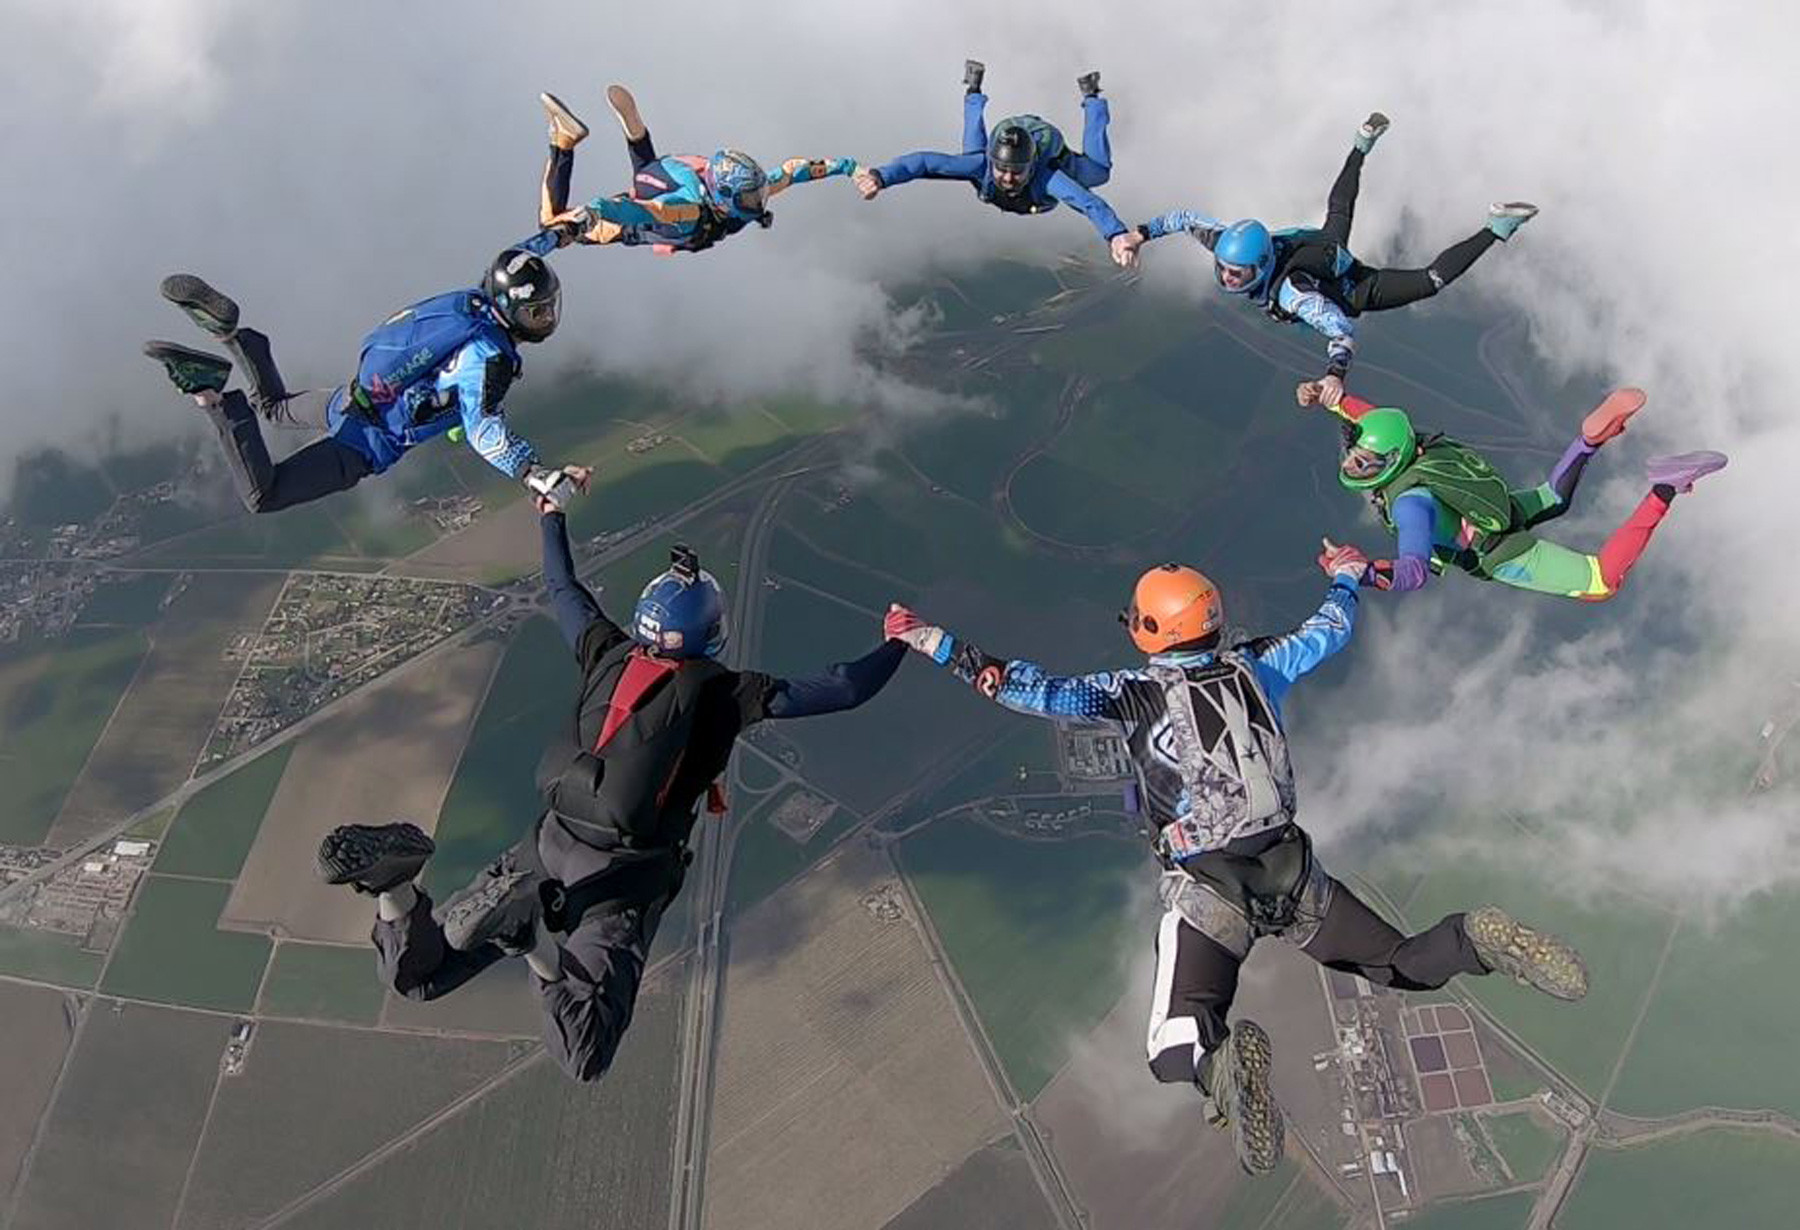 Experienced skydivers in 7-way formation at Skydive California.